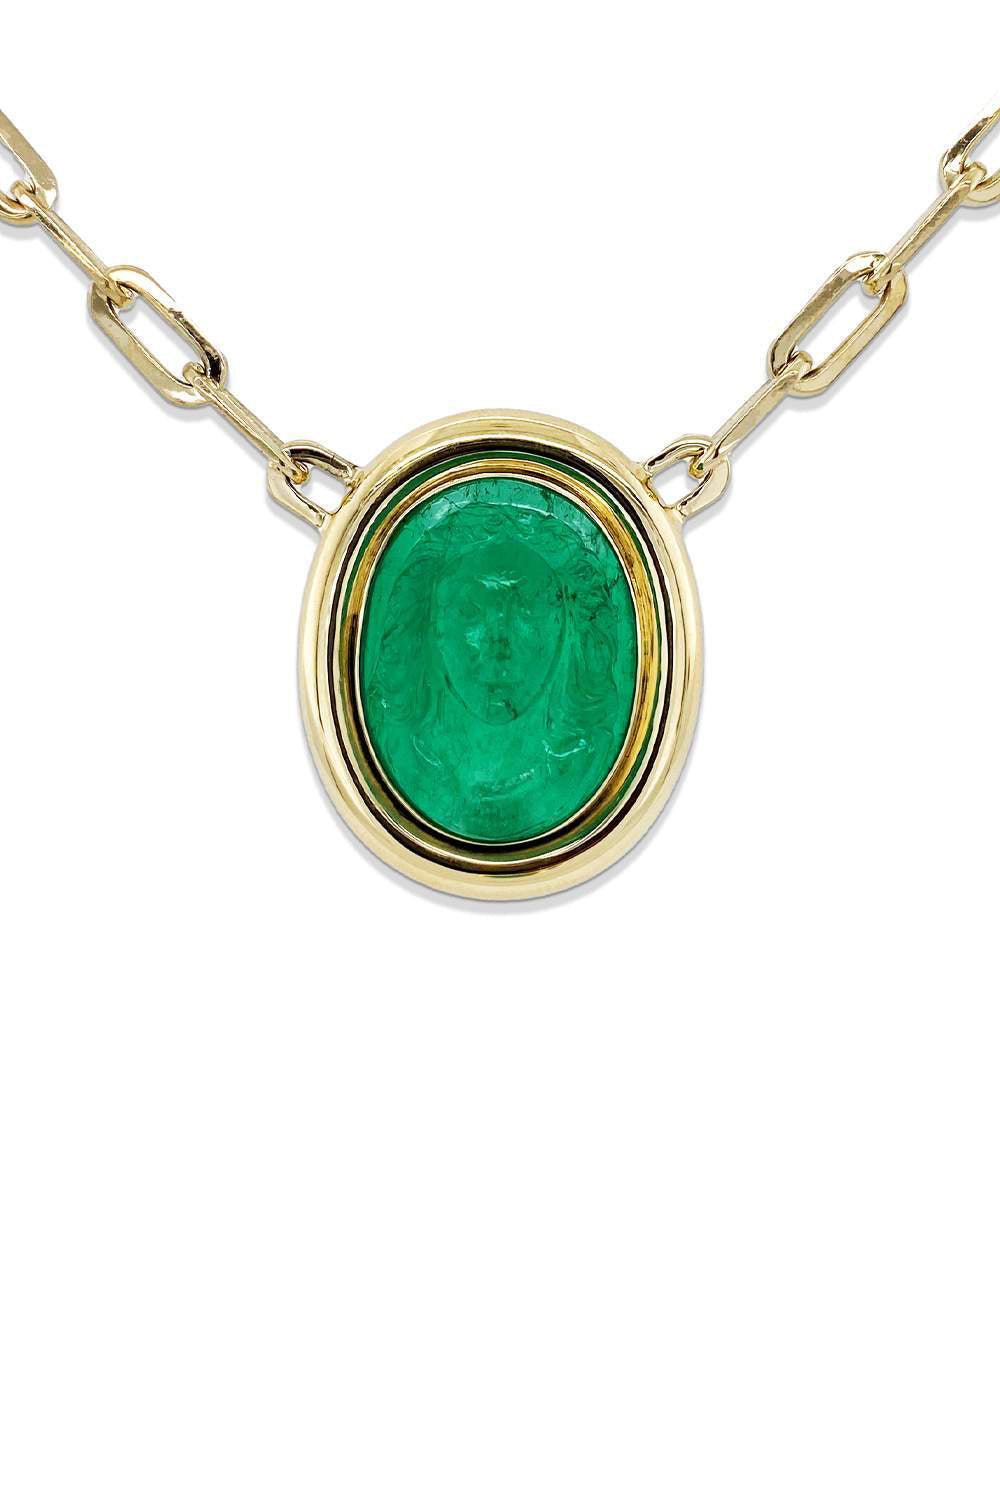 BAYCO-Emerald Pendant Necklace-YELLOW GOLD